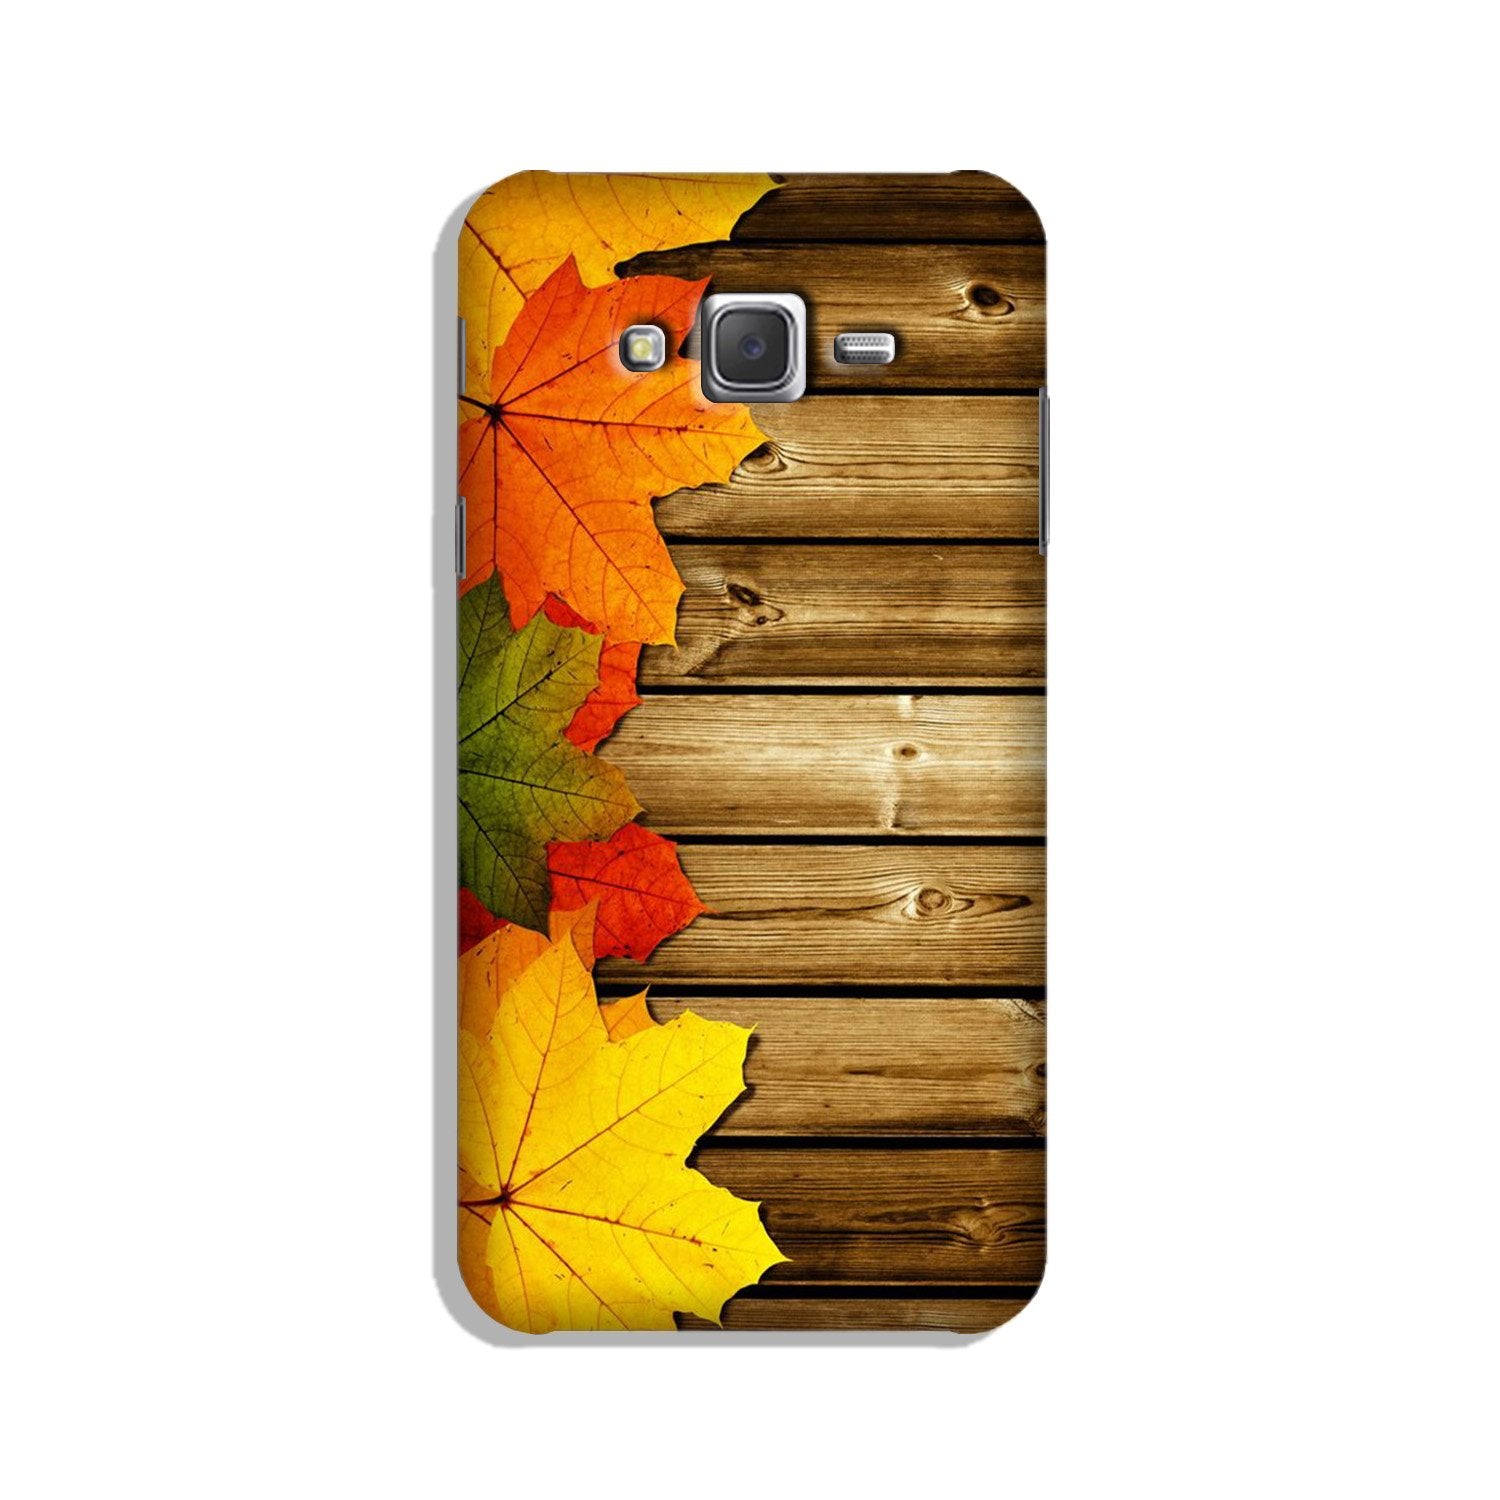 Wooden look3 Case for Galaxy J7 (2015)